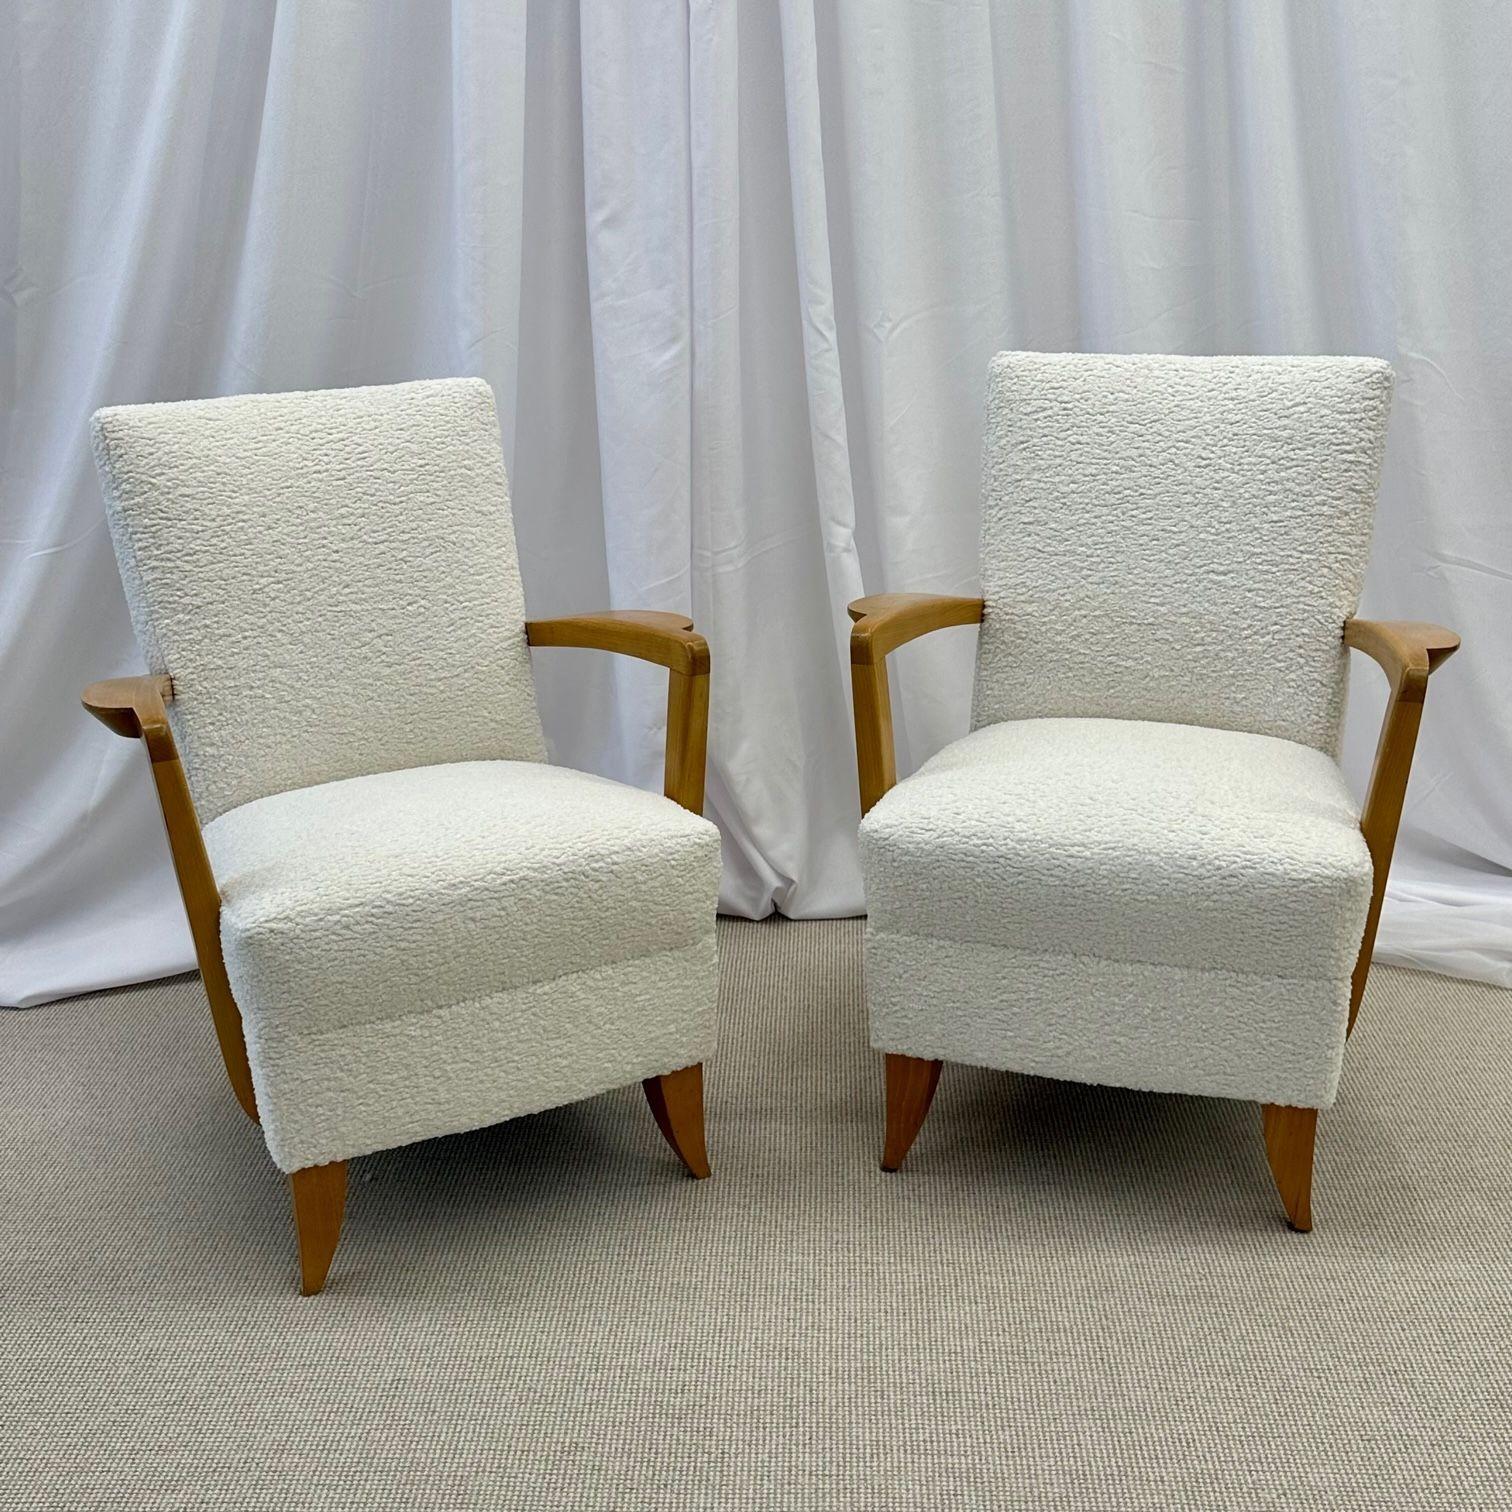 Bouclé Andre Domin, Maison Dominque, French Art Deco, Lounge Chairs, Sycamore, Boucle For Sale